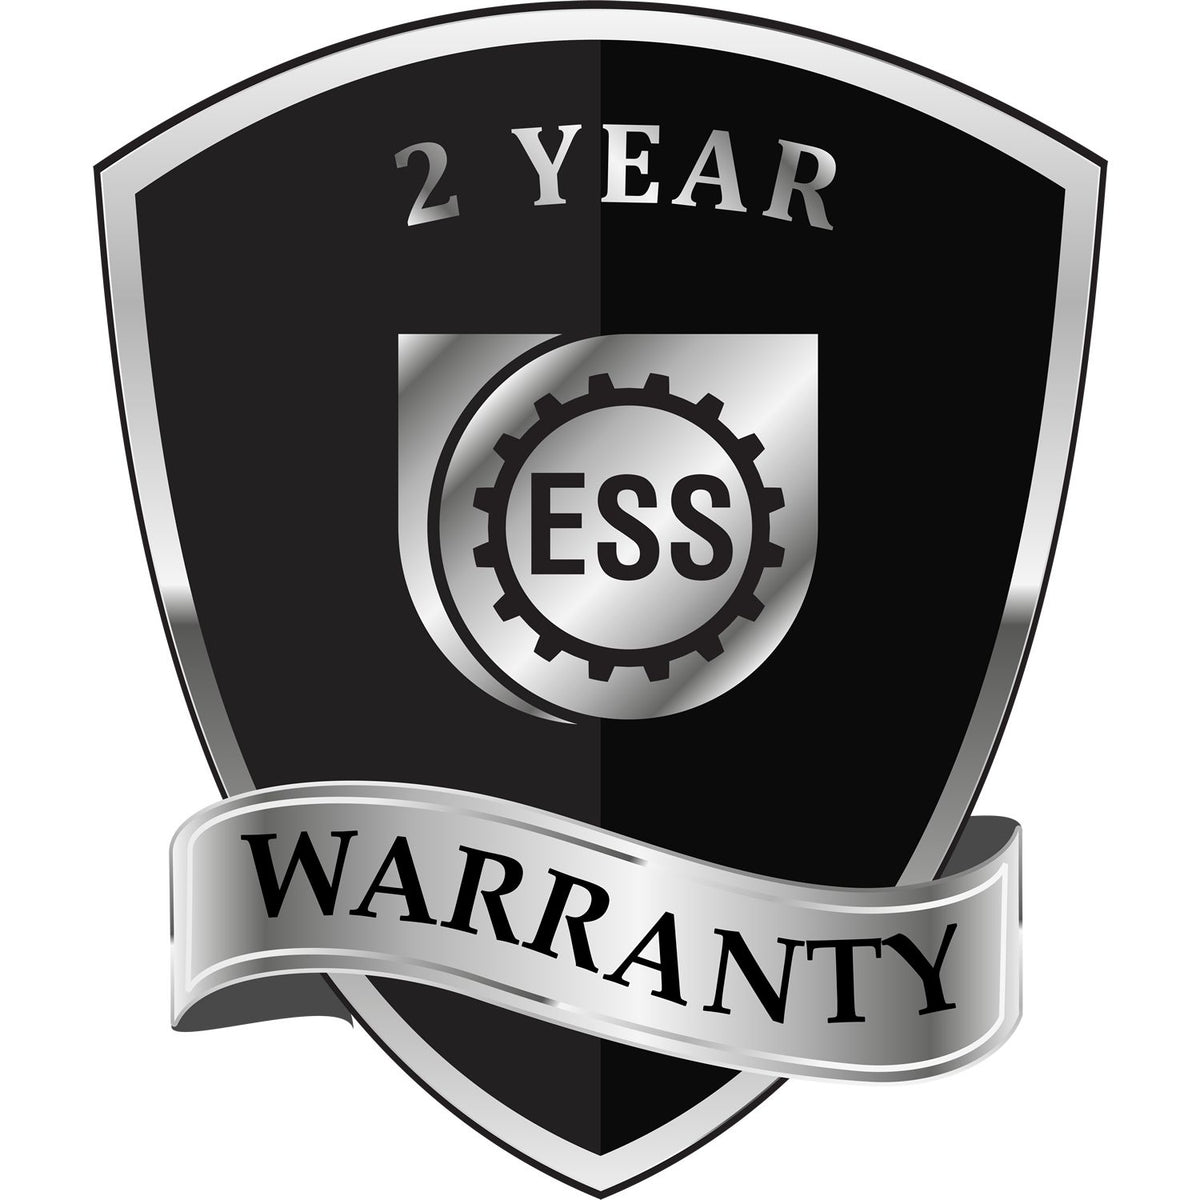 A black and silver badge or emblem showing warranty information for the Heavy Duty Cast Iron Guam Geologist Seal Embosser